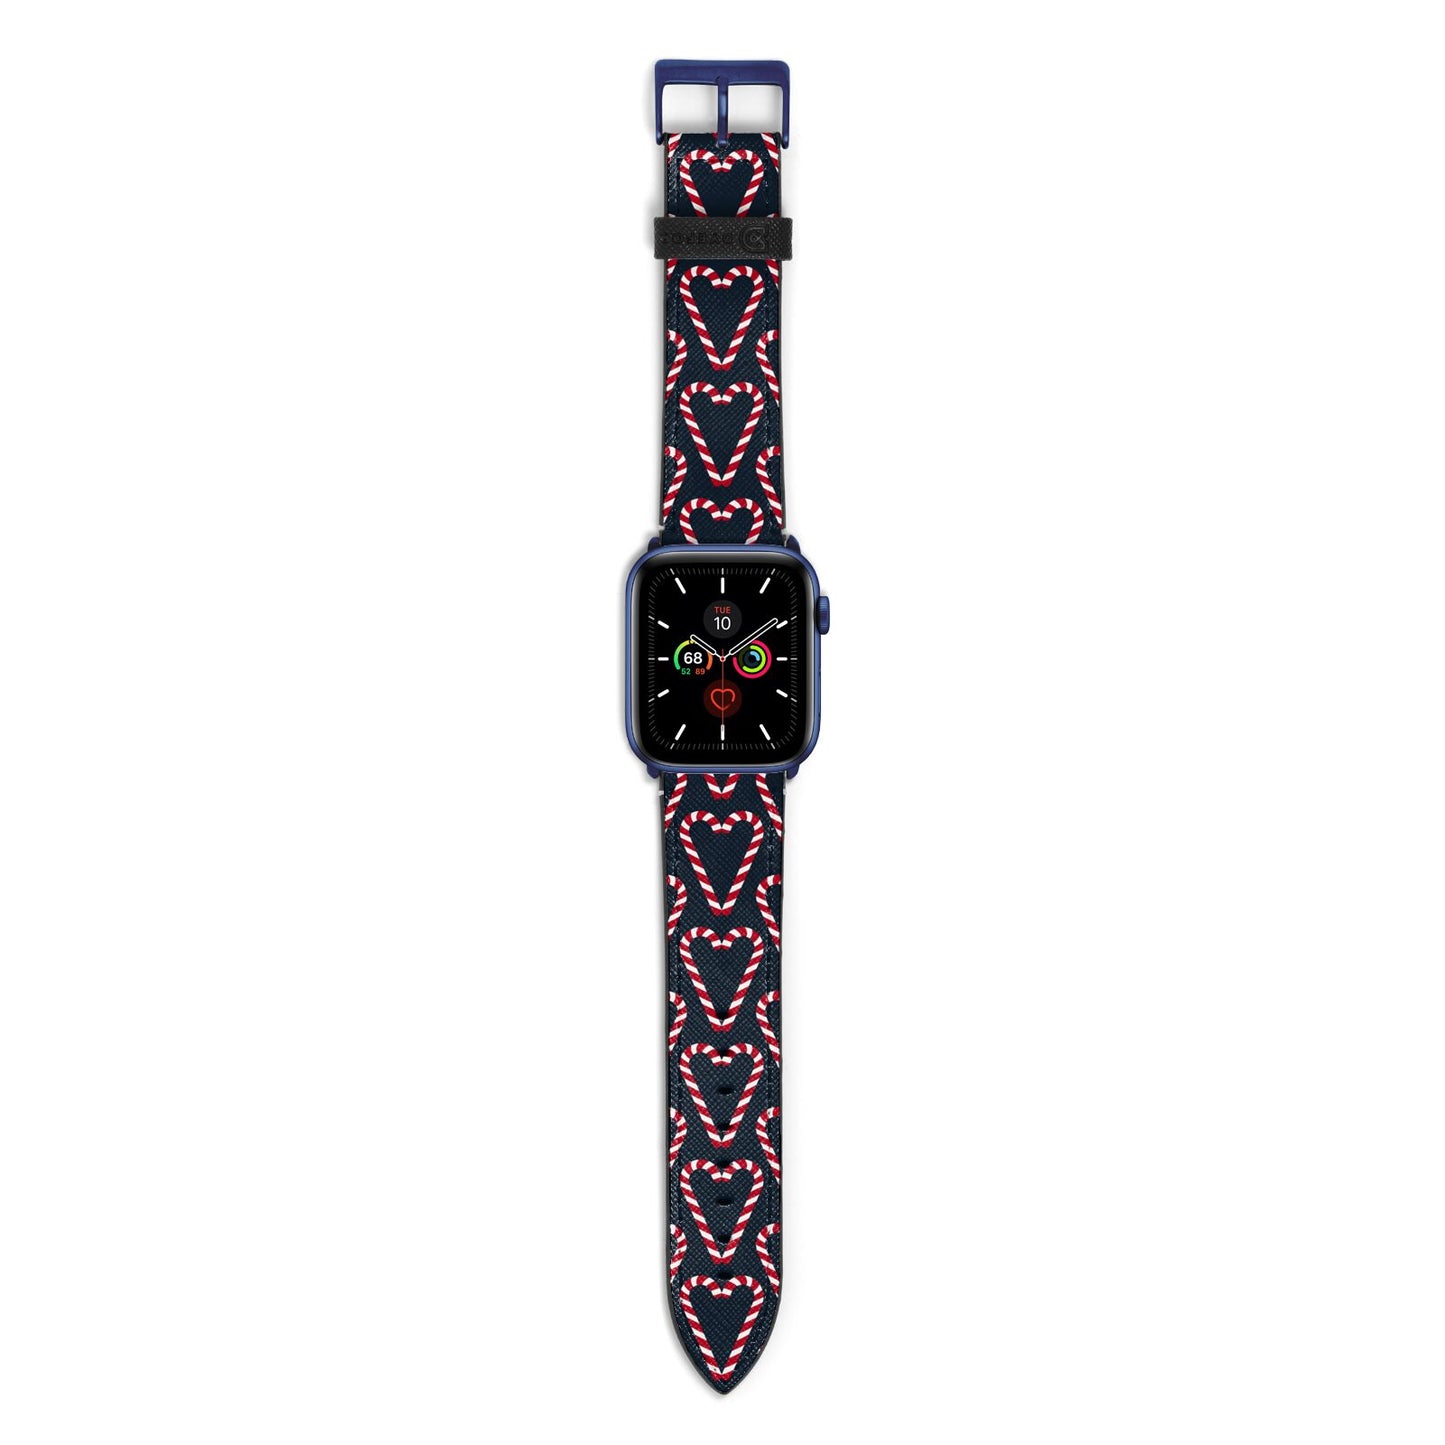 Candy Cane Pattern Apple Watch Strap with Blue Hardware